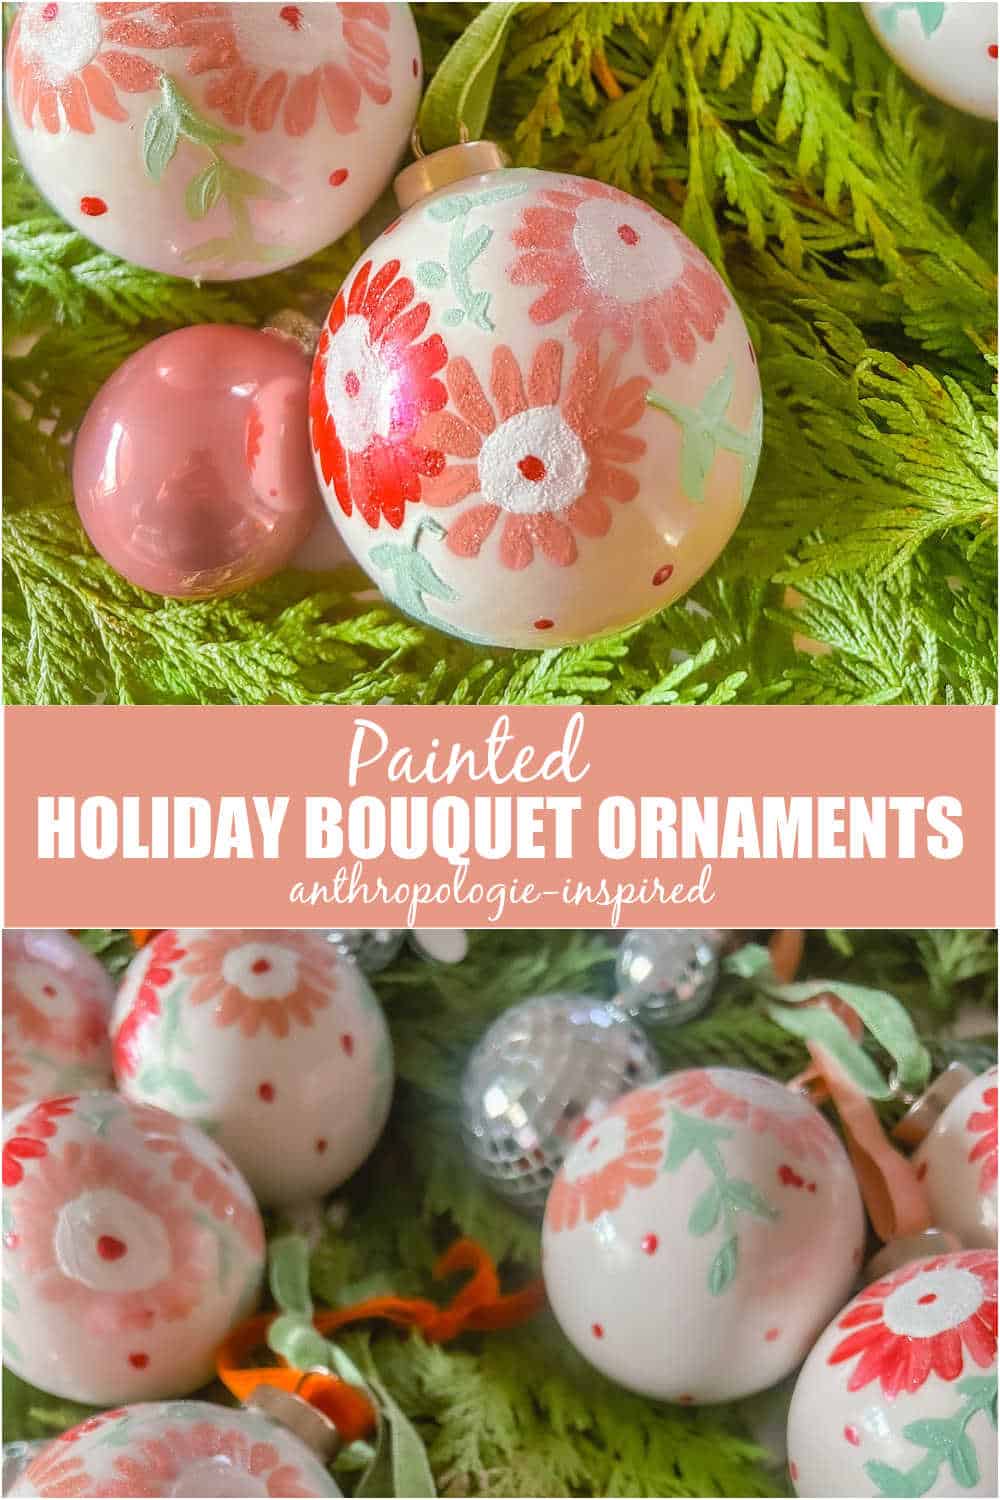 Draw inspiration from Anthropologie to create these beautifully painted floral ornaments. Each ornament becomes a miniature work of art, adding a touch of nature and elegance to your holiday decor.